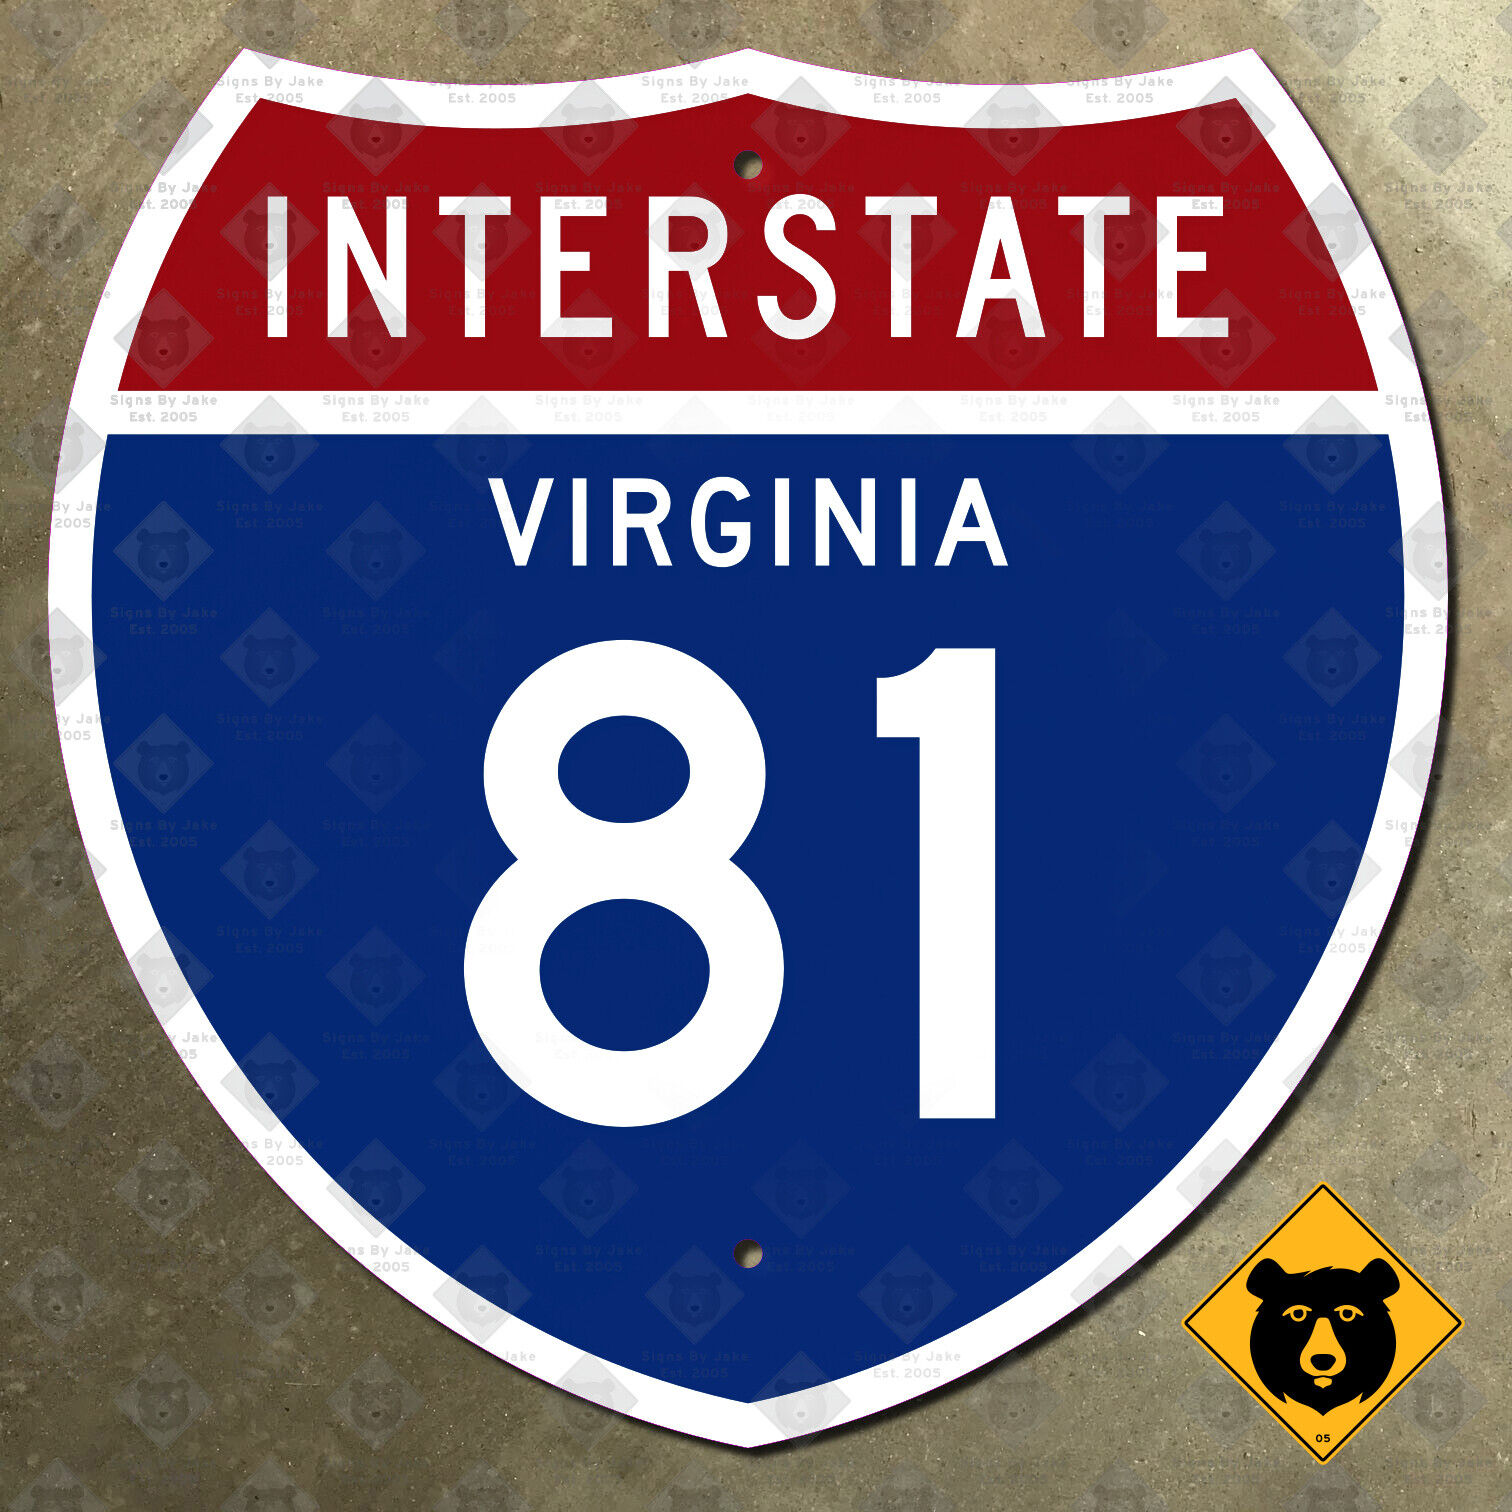 Virginia Interstate 81 highway route sign shield 1957 Roanoke Winchester 12x12